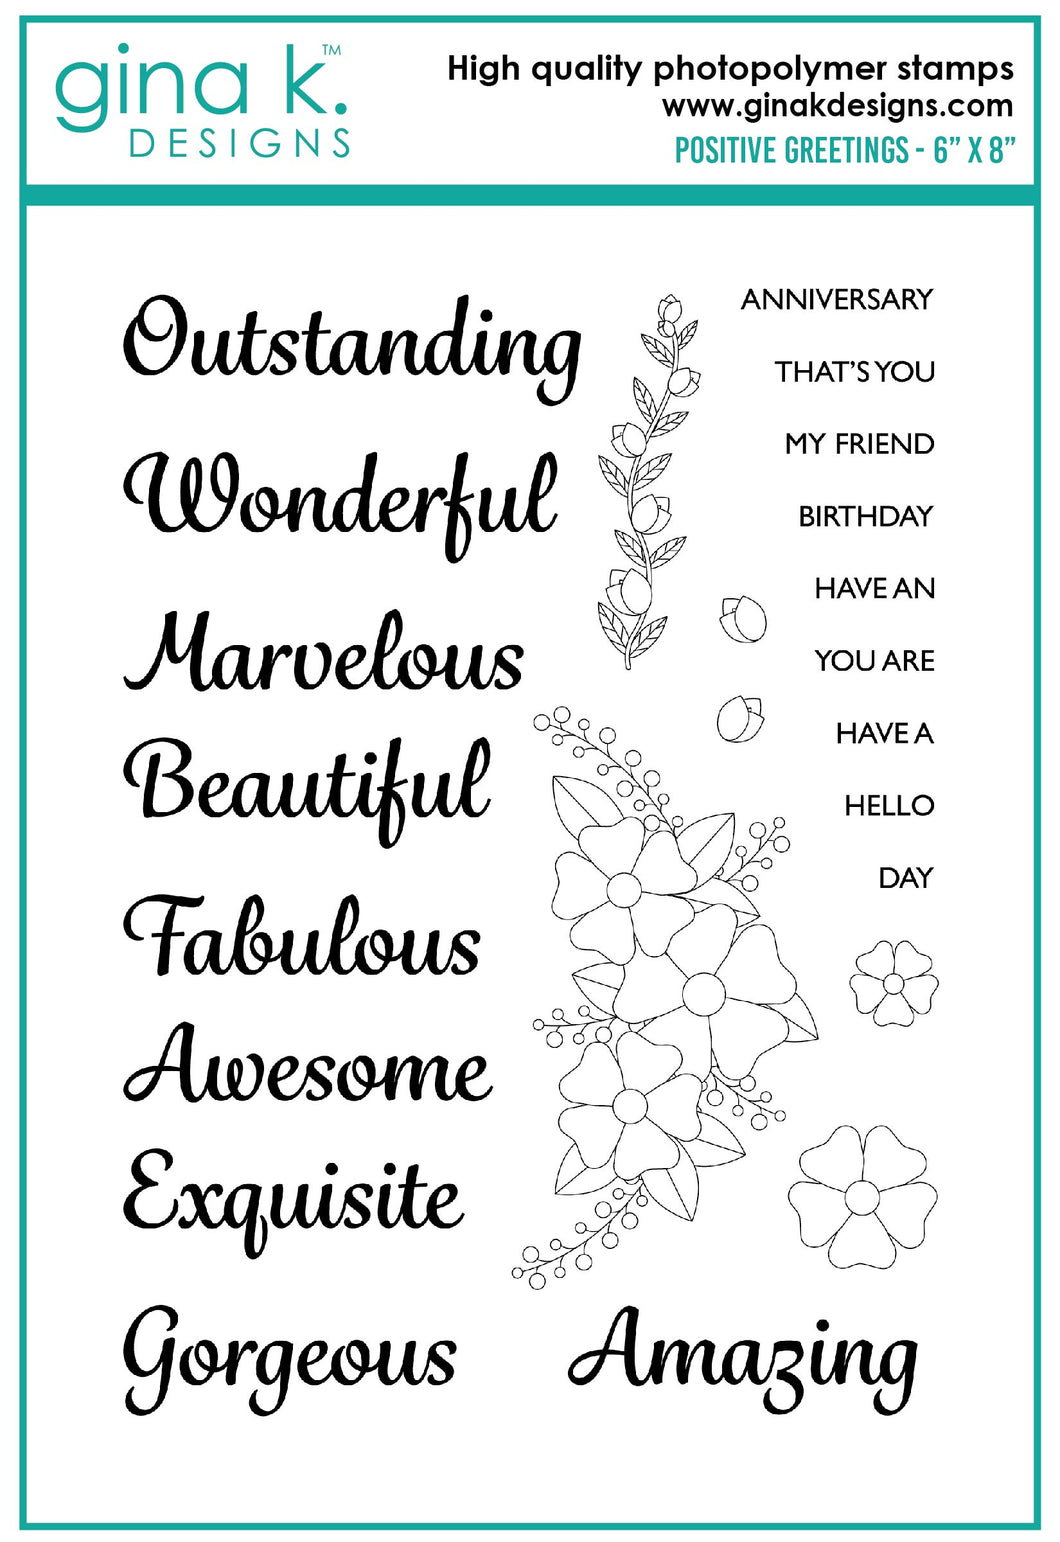 Gina K. designs - Stamps - Positive Greetings. Positive Greetings is a stamp set by Debrah Warner. This set is made of premium clear photopolymer and measures 6